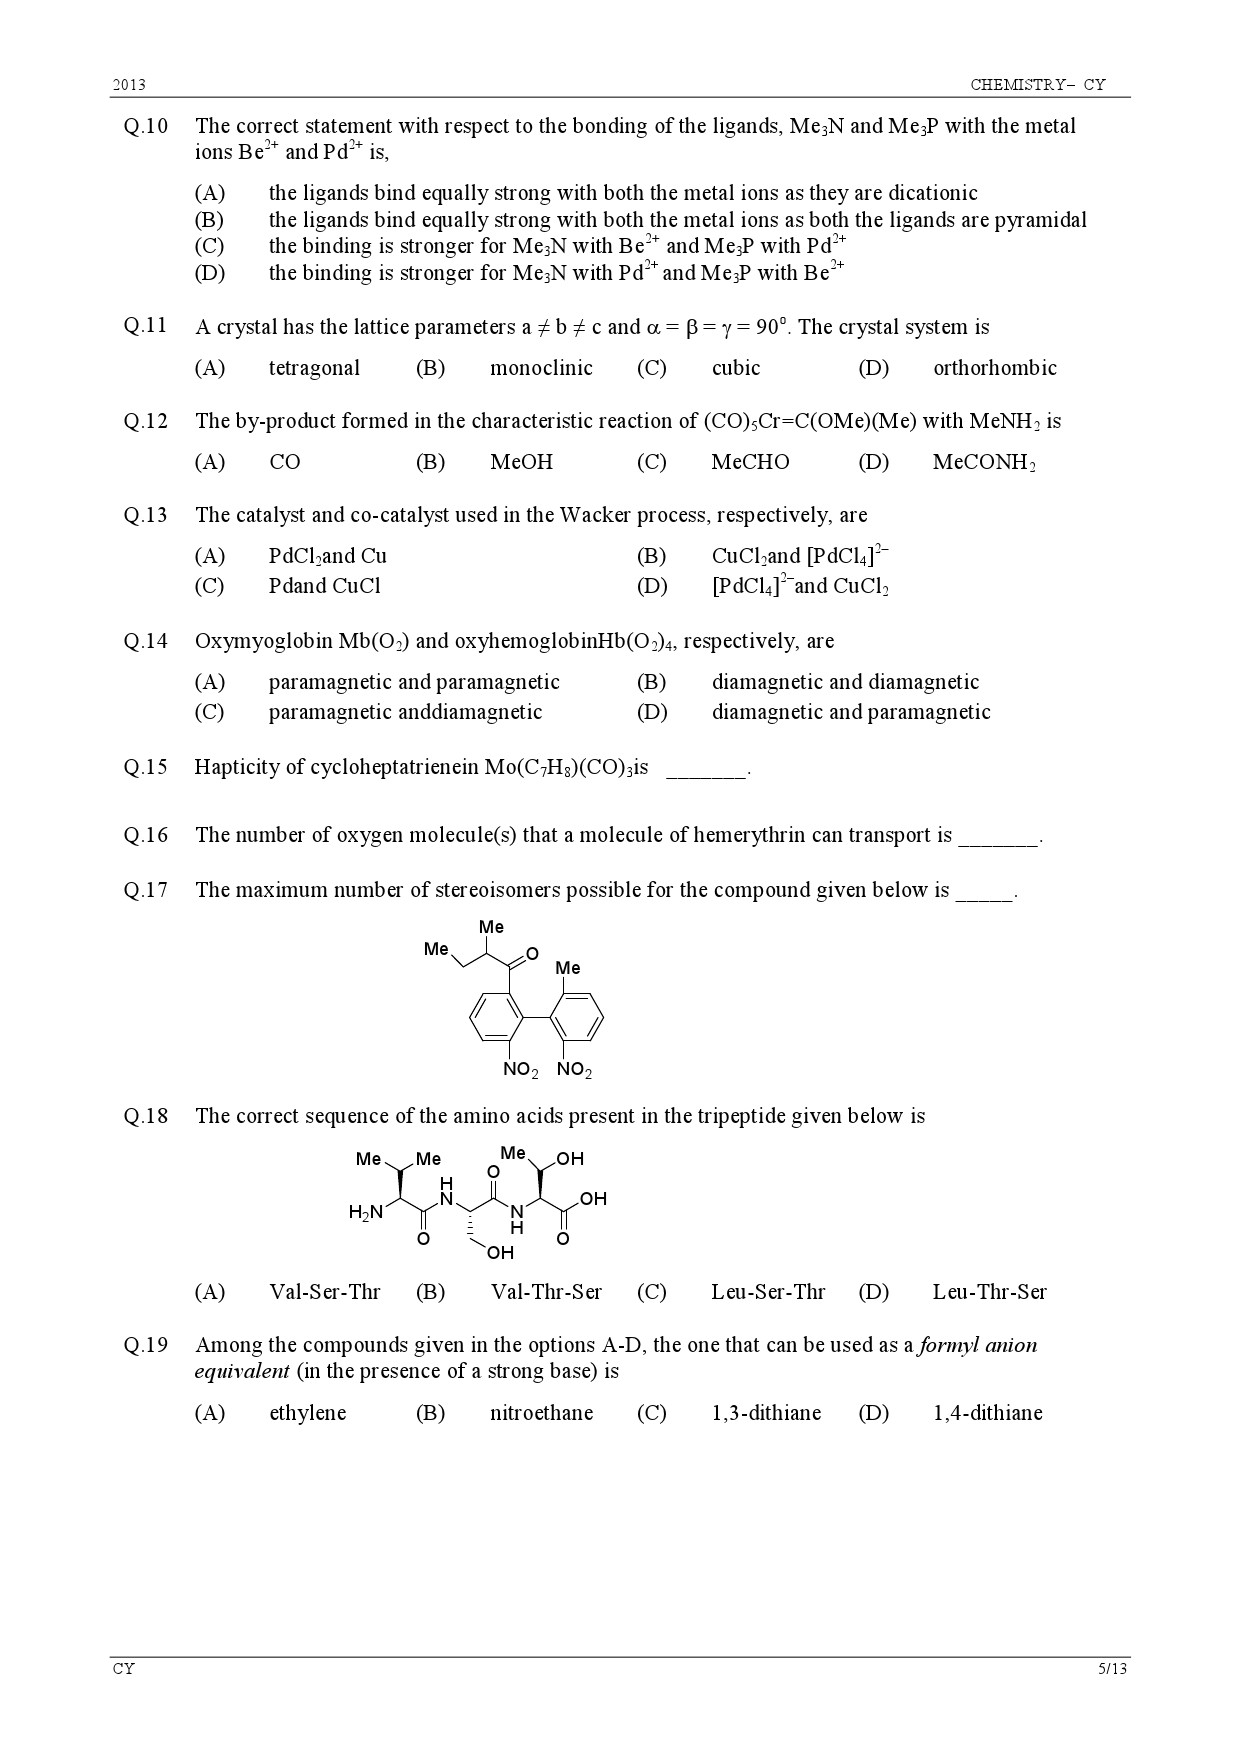 GATE Exam Question Paper 2013 Chemistry 5